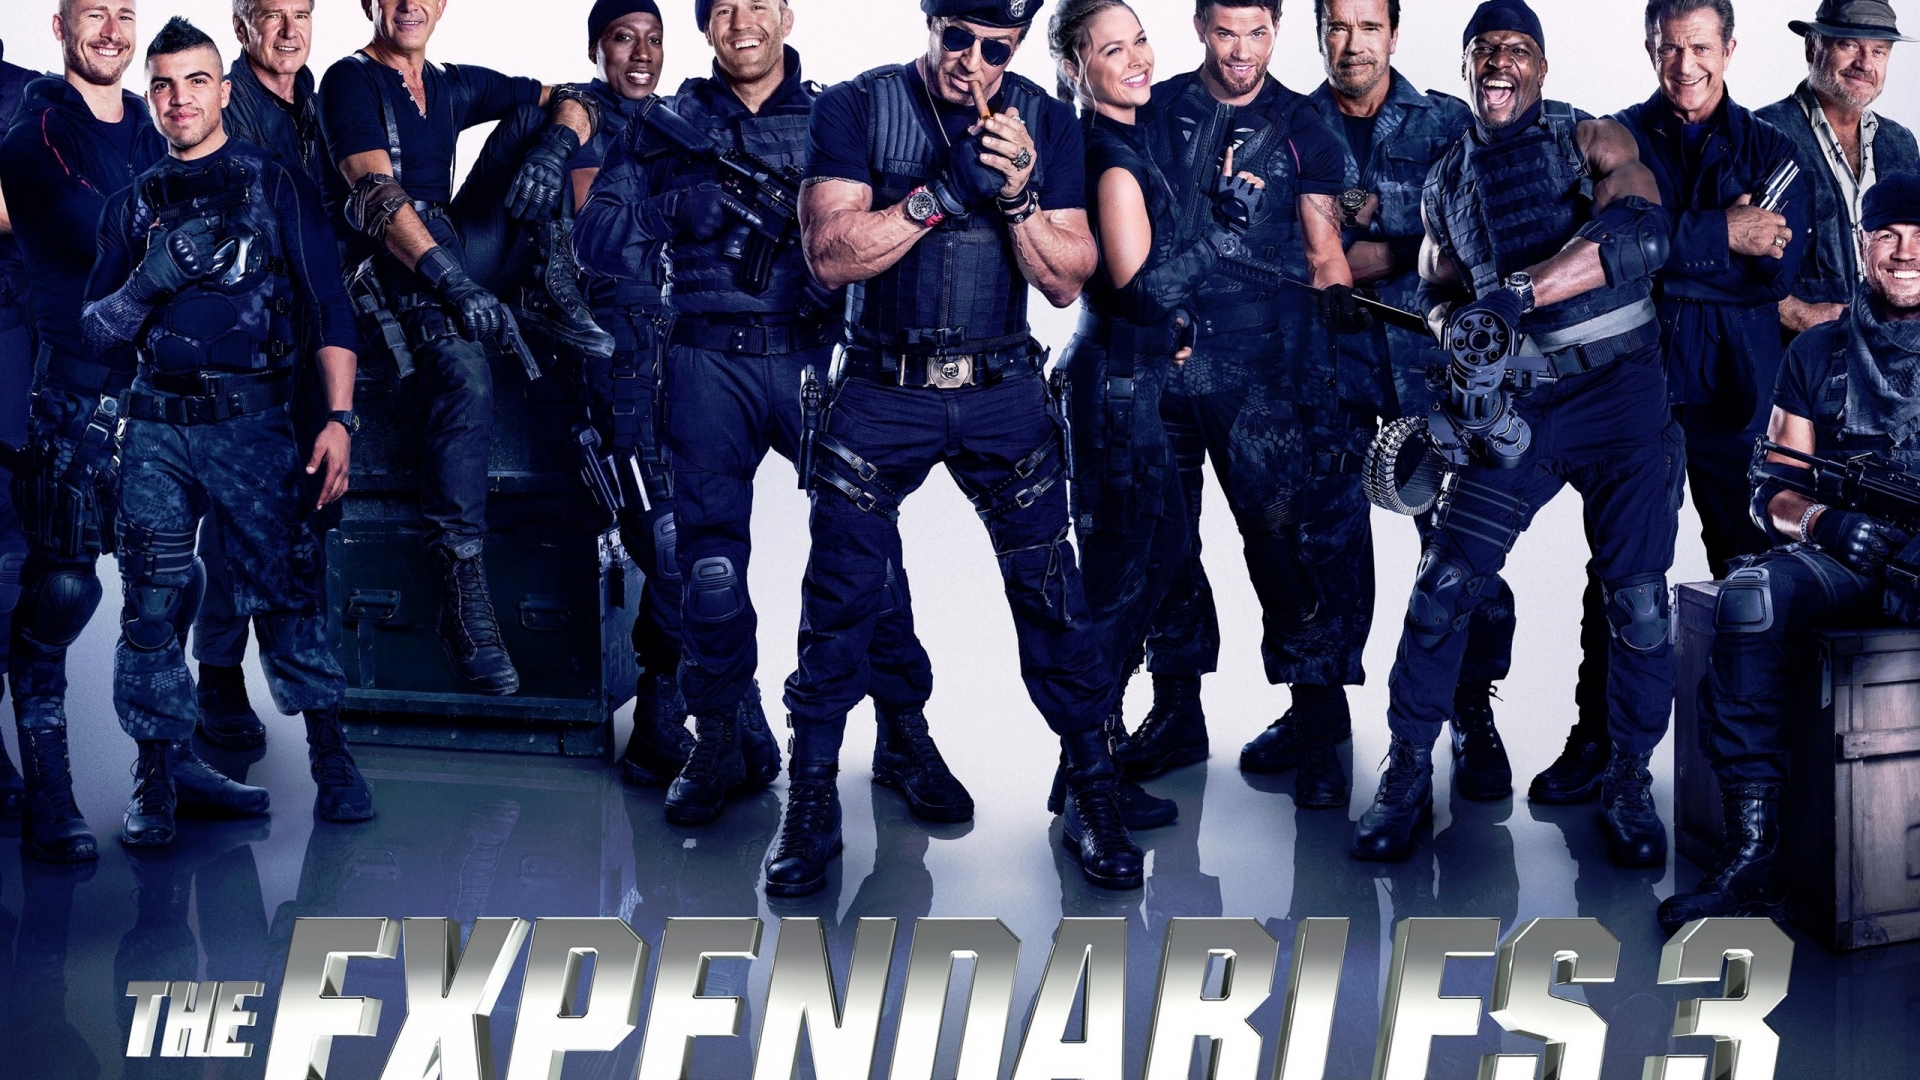 The Expendables 3 Poster for 1920 x 1080 HDTV 1080p resolution